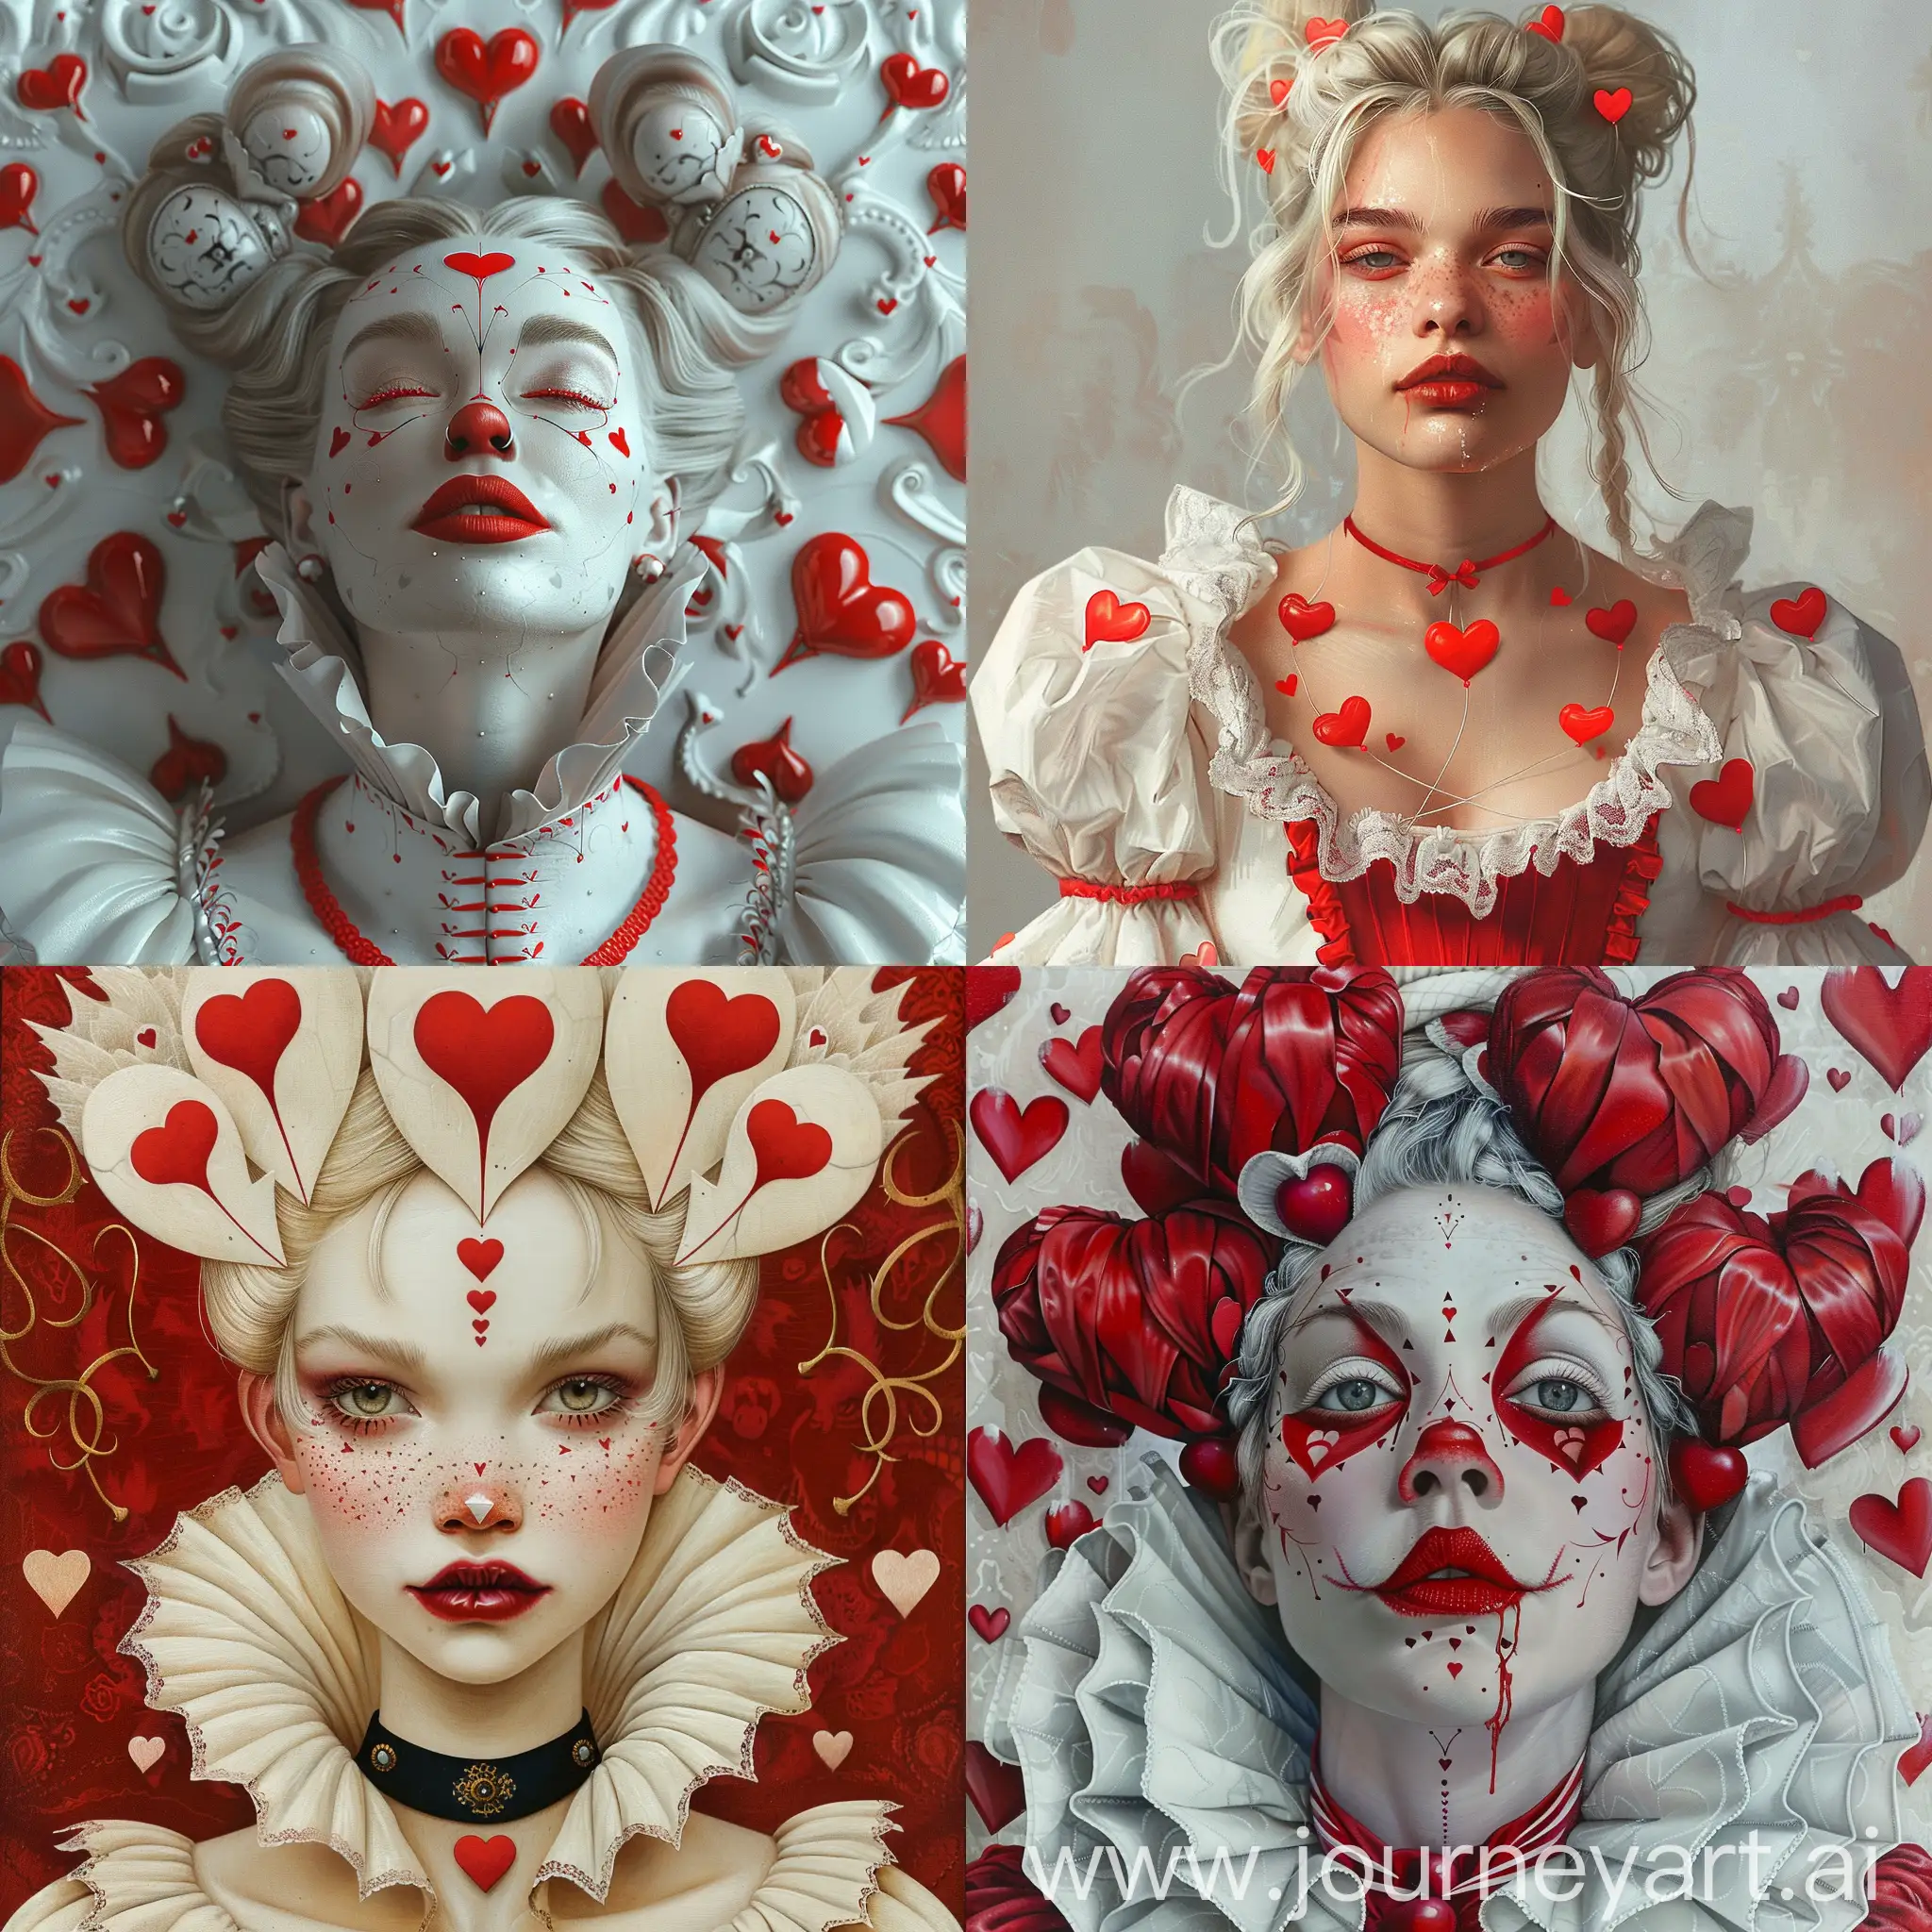 flat queen of hearts on social media twitter facebook, in the style of darkly romantic realism, meticulously detailed, slovenian paintings, white and crimson, realistic hyper-detail, dutch and flemish, ultra detailed, in flat style